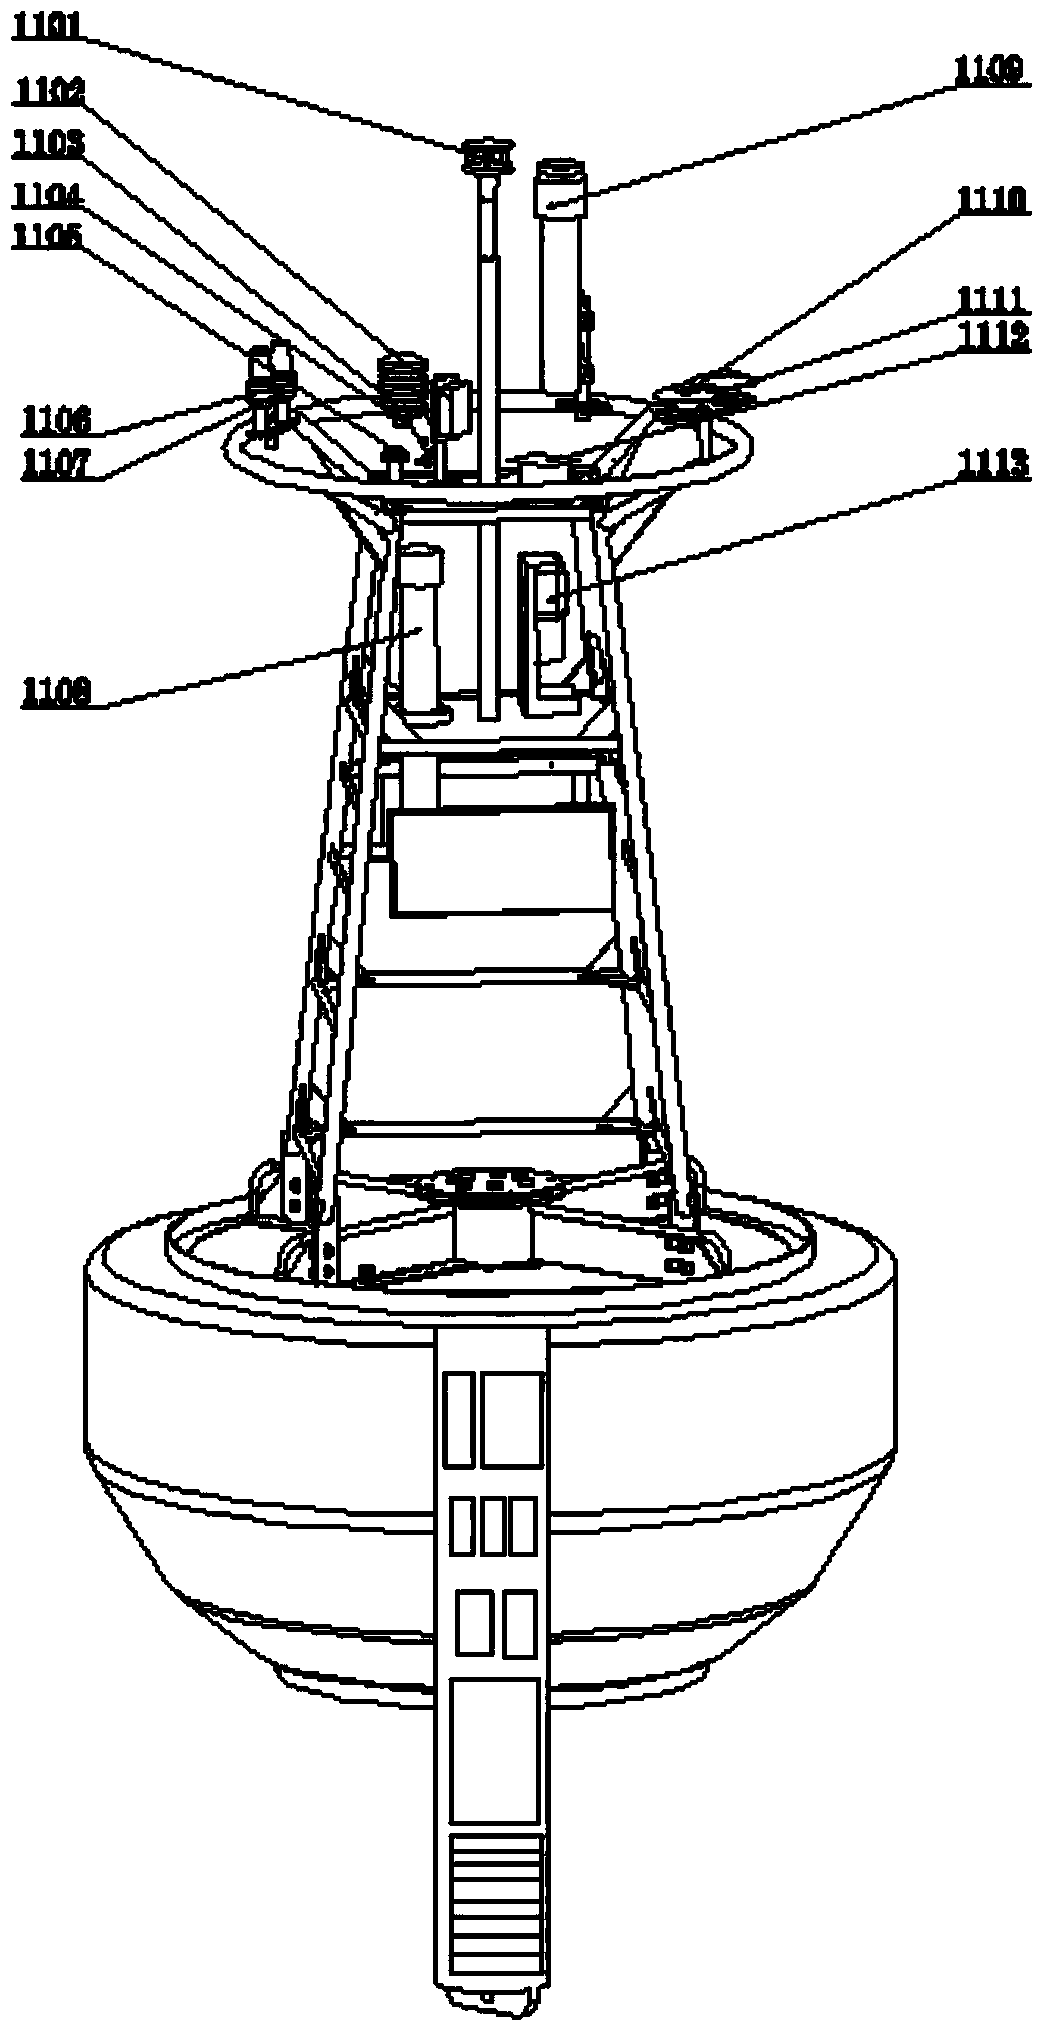 Deep-sea observing buoy system based on inductive coupling and satellite communication techniques